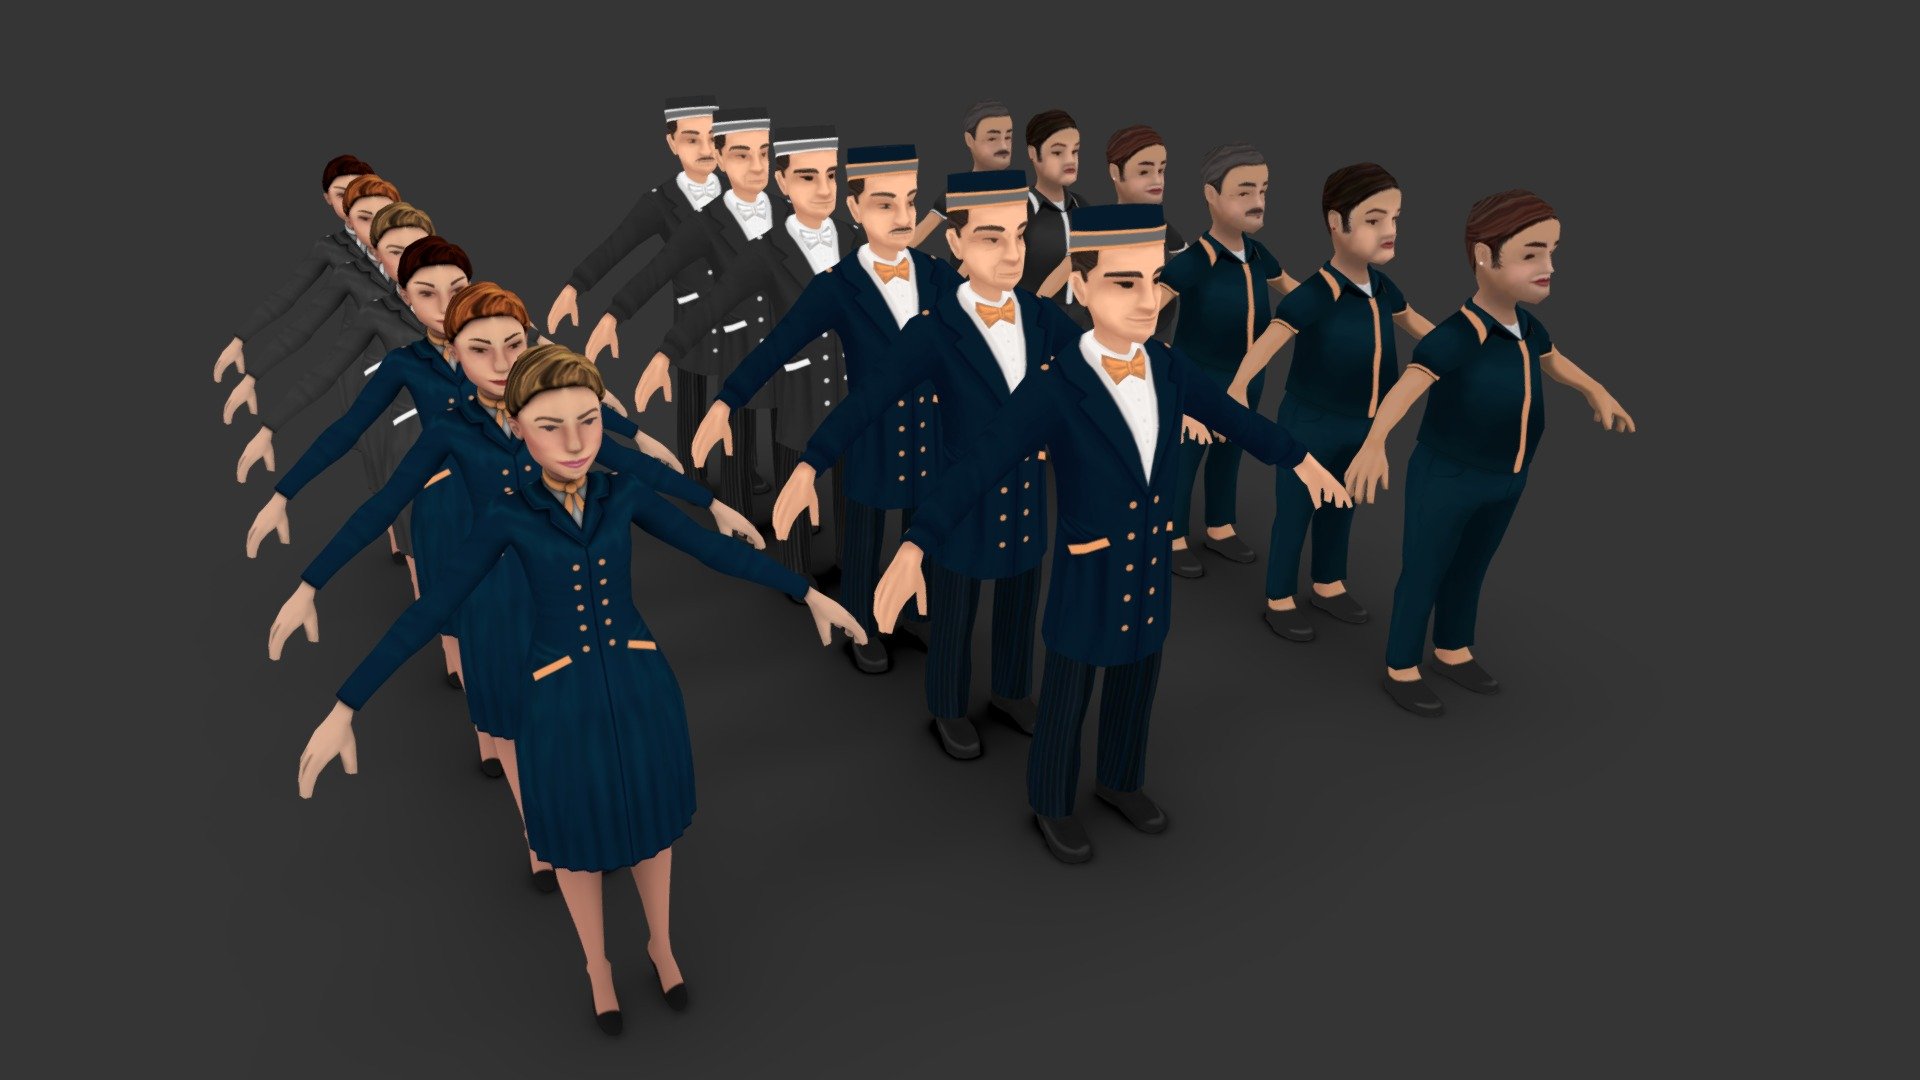 3 x 3D models in fbx format

every model has 6x 2048 textures

3 faces and 2 uniform colors per model

Rigged with mixamo and corrected by hand

Comes with blend file with RIG - Characters pack lowpoly Hotel Staff rigged - Buy Royalty Free 3D model by mahrcheen 3d model